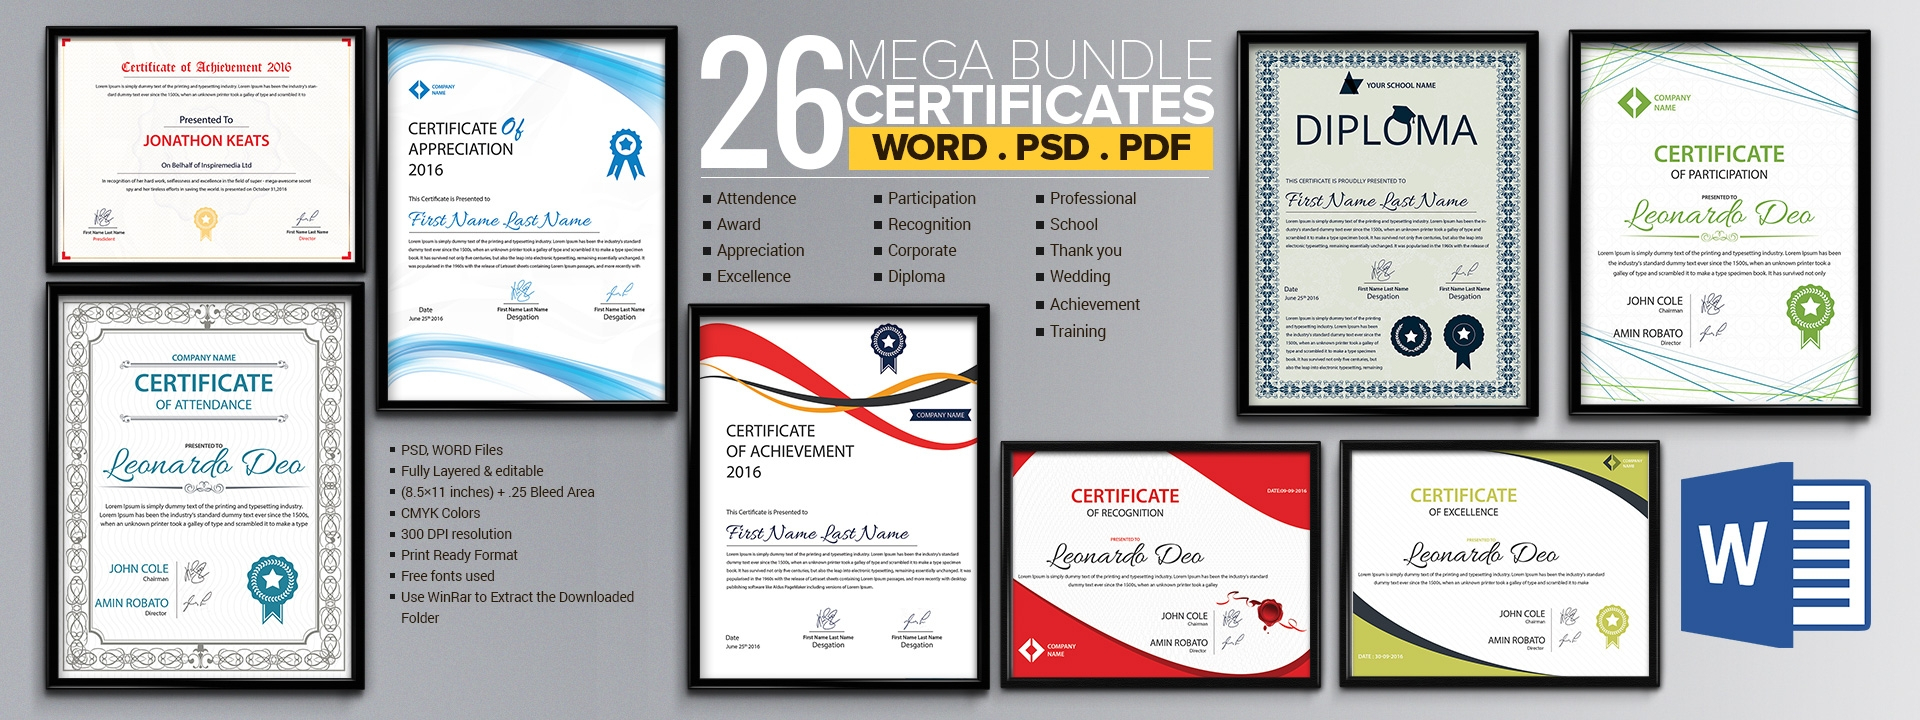 Word Certificate Template - 53+ Free Download Samples Intended For Microsoft Office Certificate Templates Free